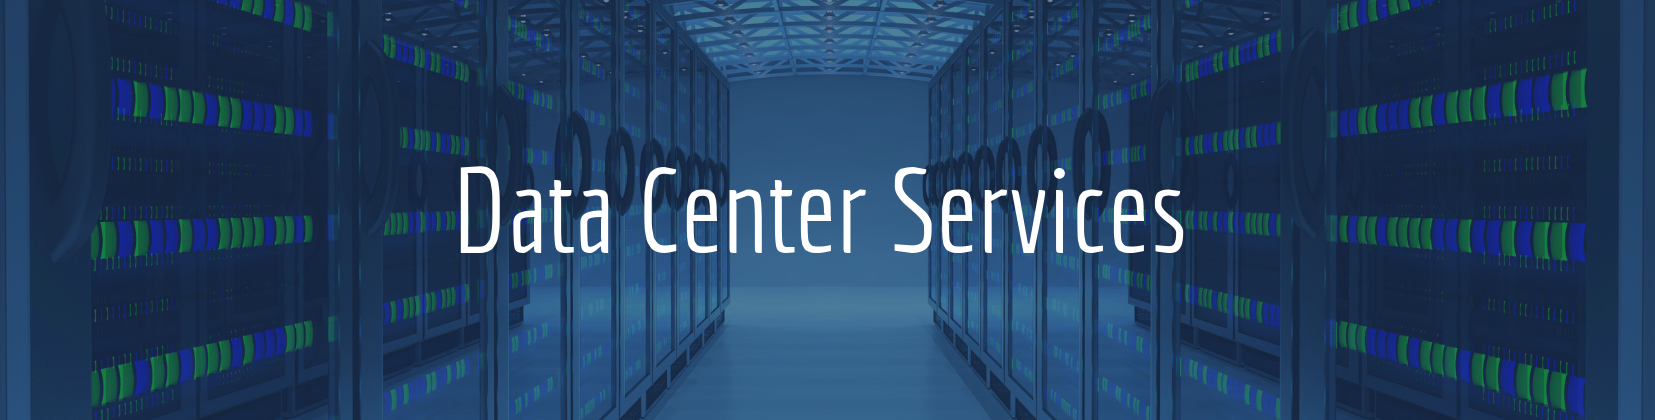 Data Center Services The mission of the Data Center Services department is to maintain all operating systems, hardware, and database infrastructure in regards to UTRGV critical IT Services. Data Center Services assist in maintaining Microsoft Office 365 service offerings. We also oversee Data Center operations for several Data Centers located in Edinburg, Arlington, and Brownsville.  